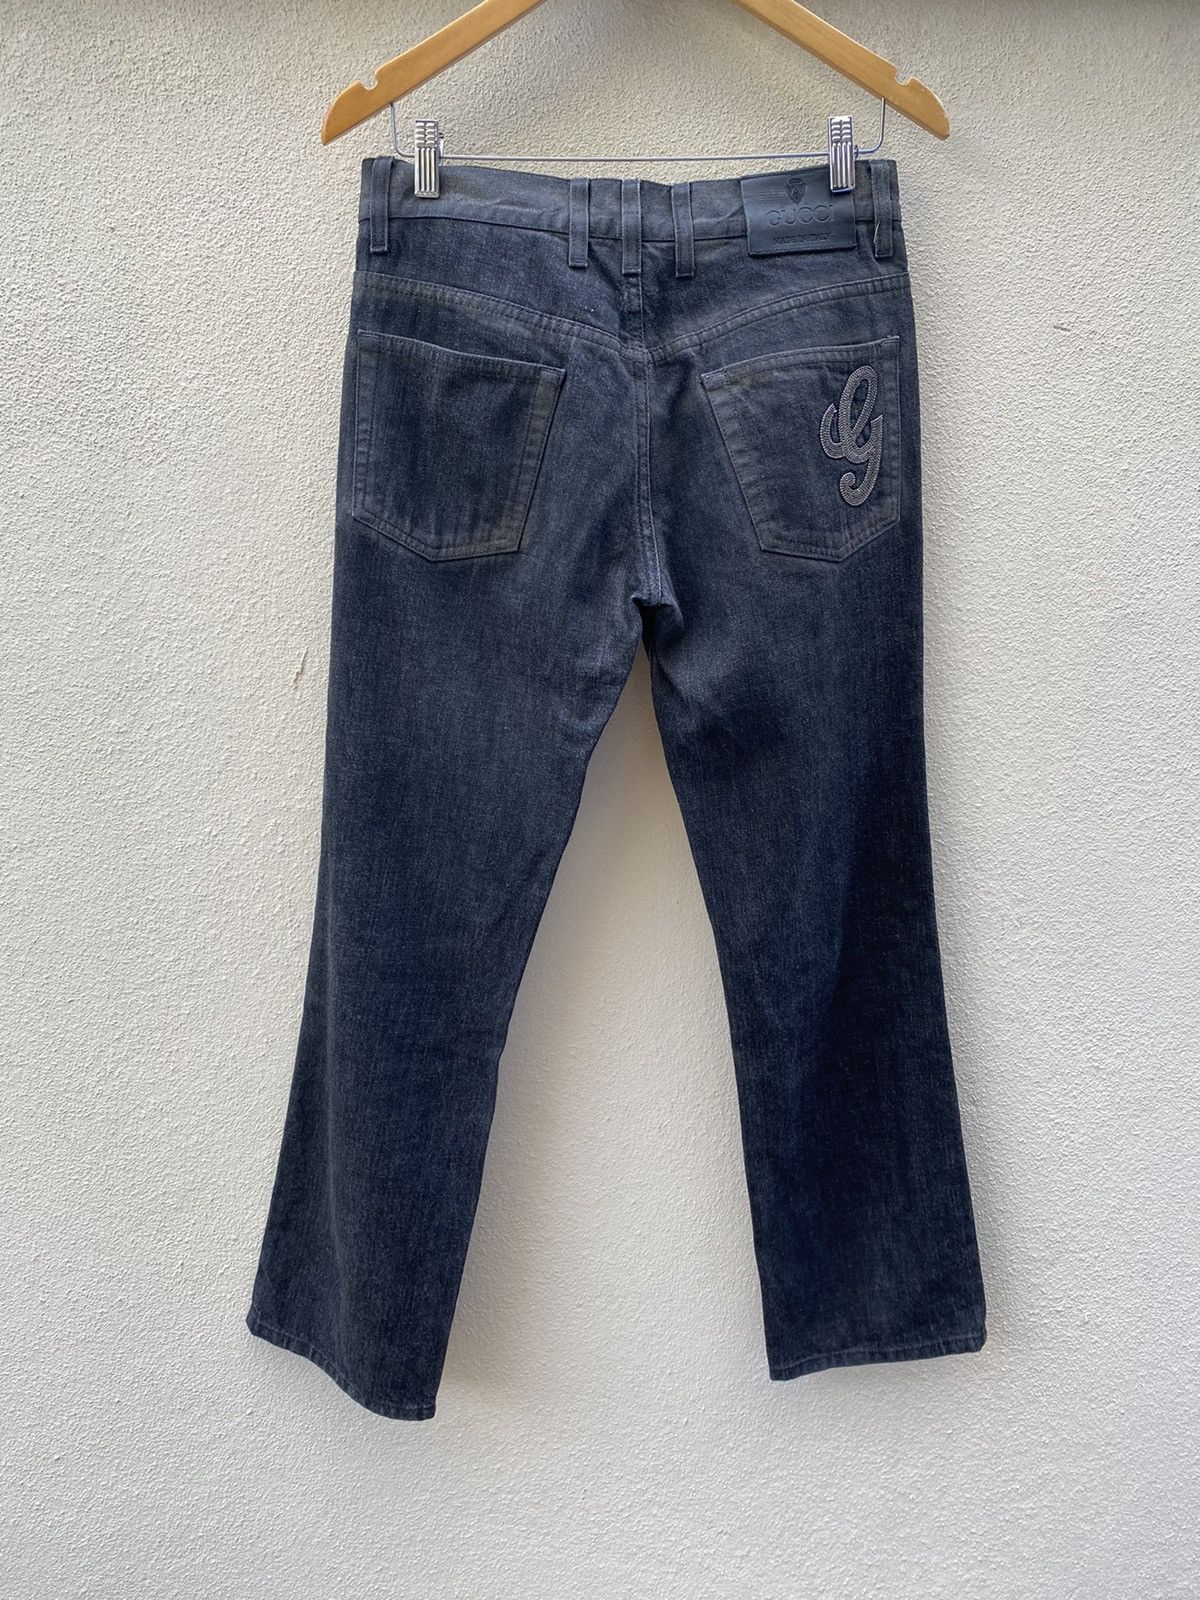 GUCCI Straight Cut Jeans Made in Italy - 7